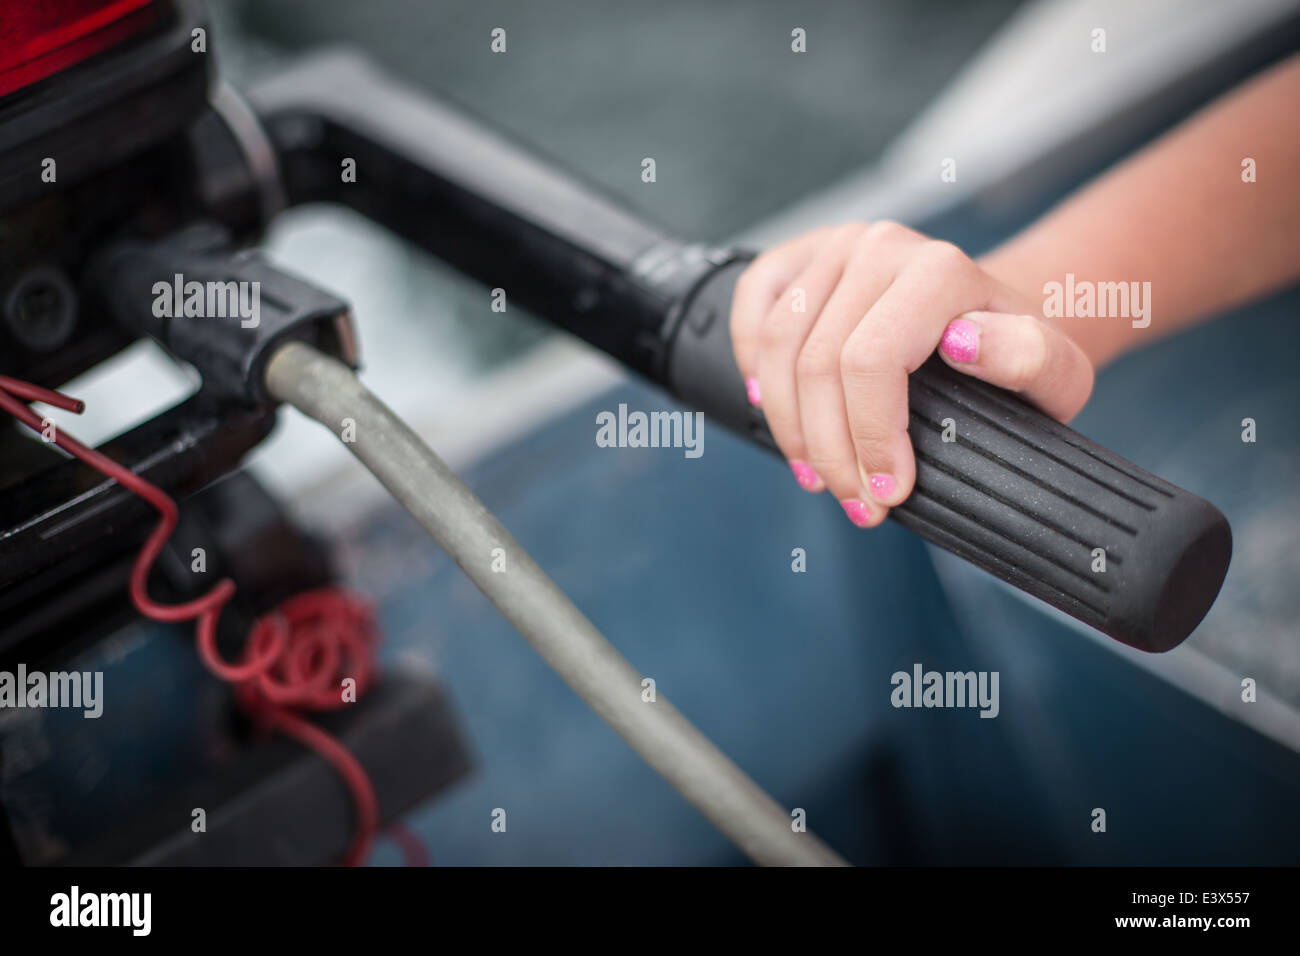 Little girl's hand with pink nail polish on boat throttle. Stock Photo